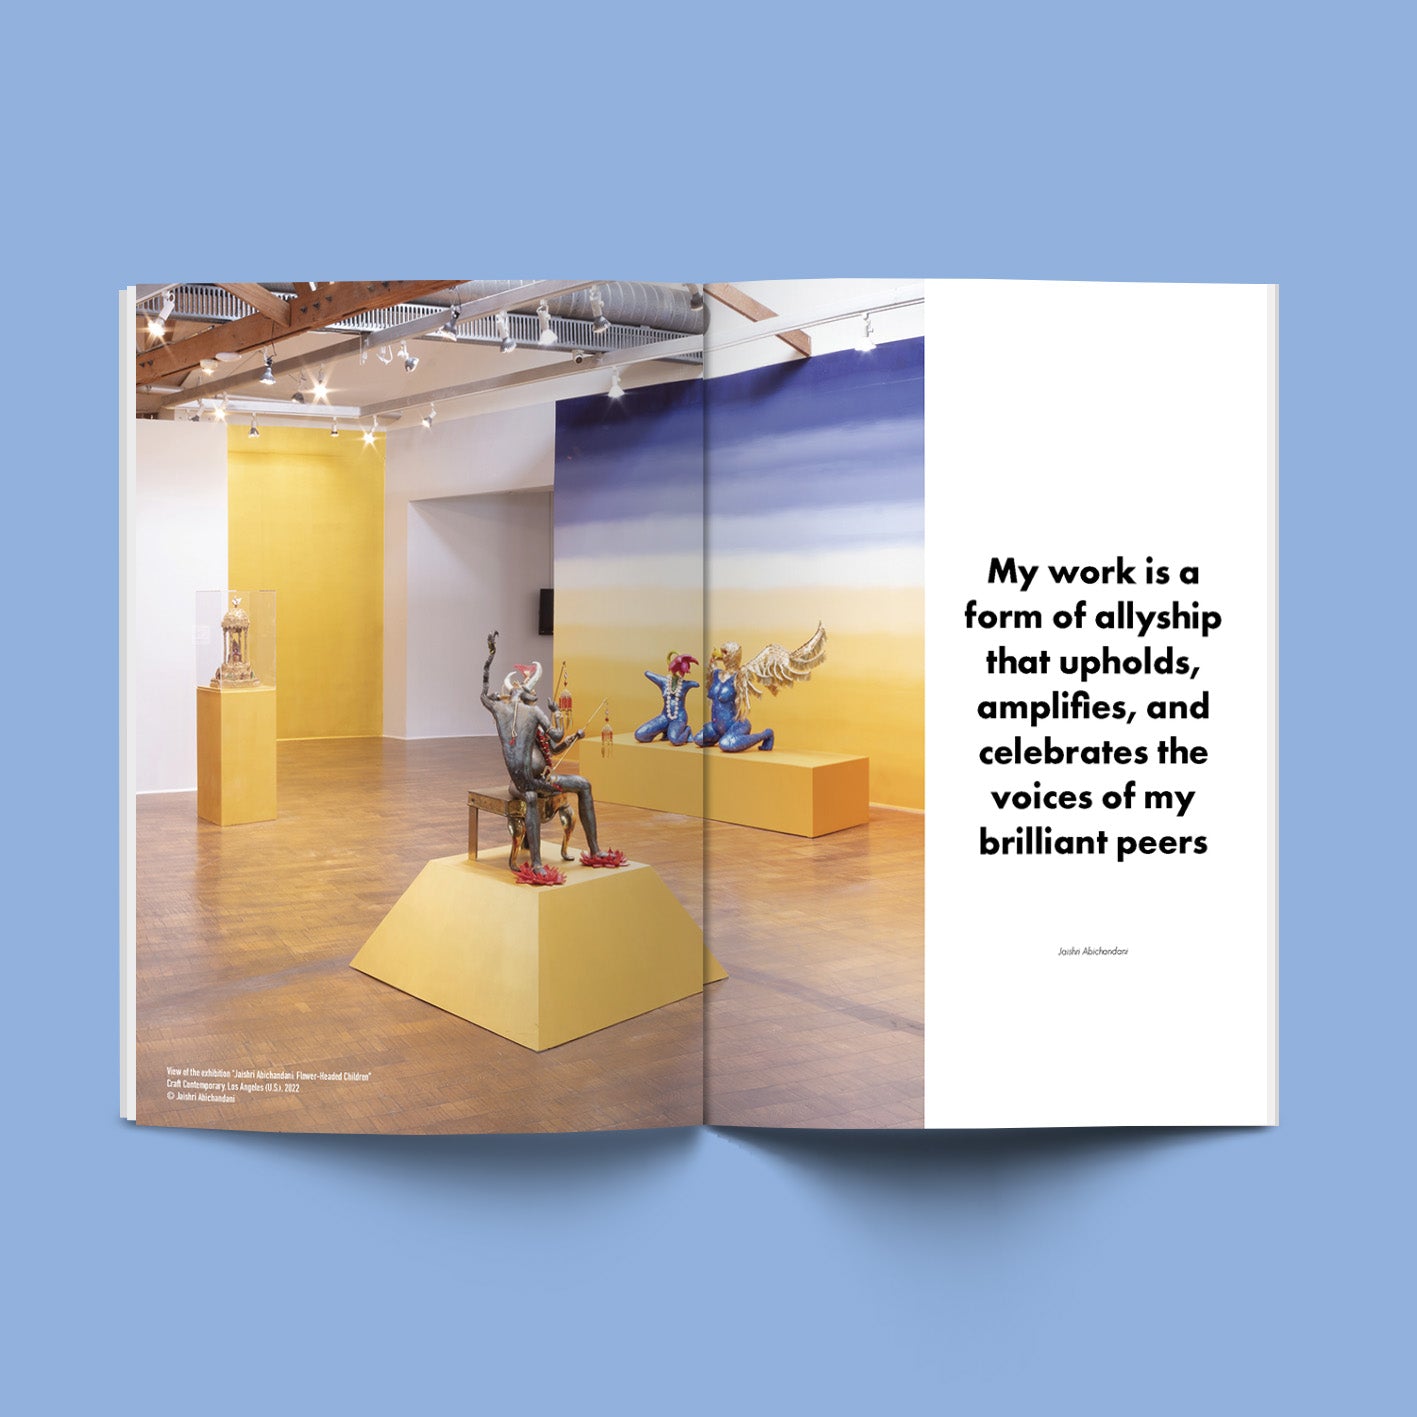 Mockup of the third issue of Convergence Magazine in French. Spread of the category "A coffee with" featuring Jaishri Abichandani. A picture of her sculptures is accompanied by a quote "My work is a form of allyship that upholds, amplifies, and celebrates the voices of my brilliant peers"